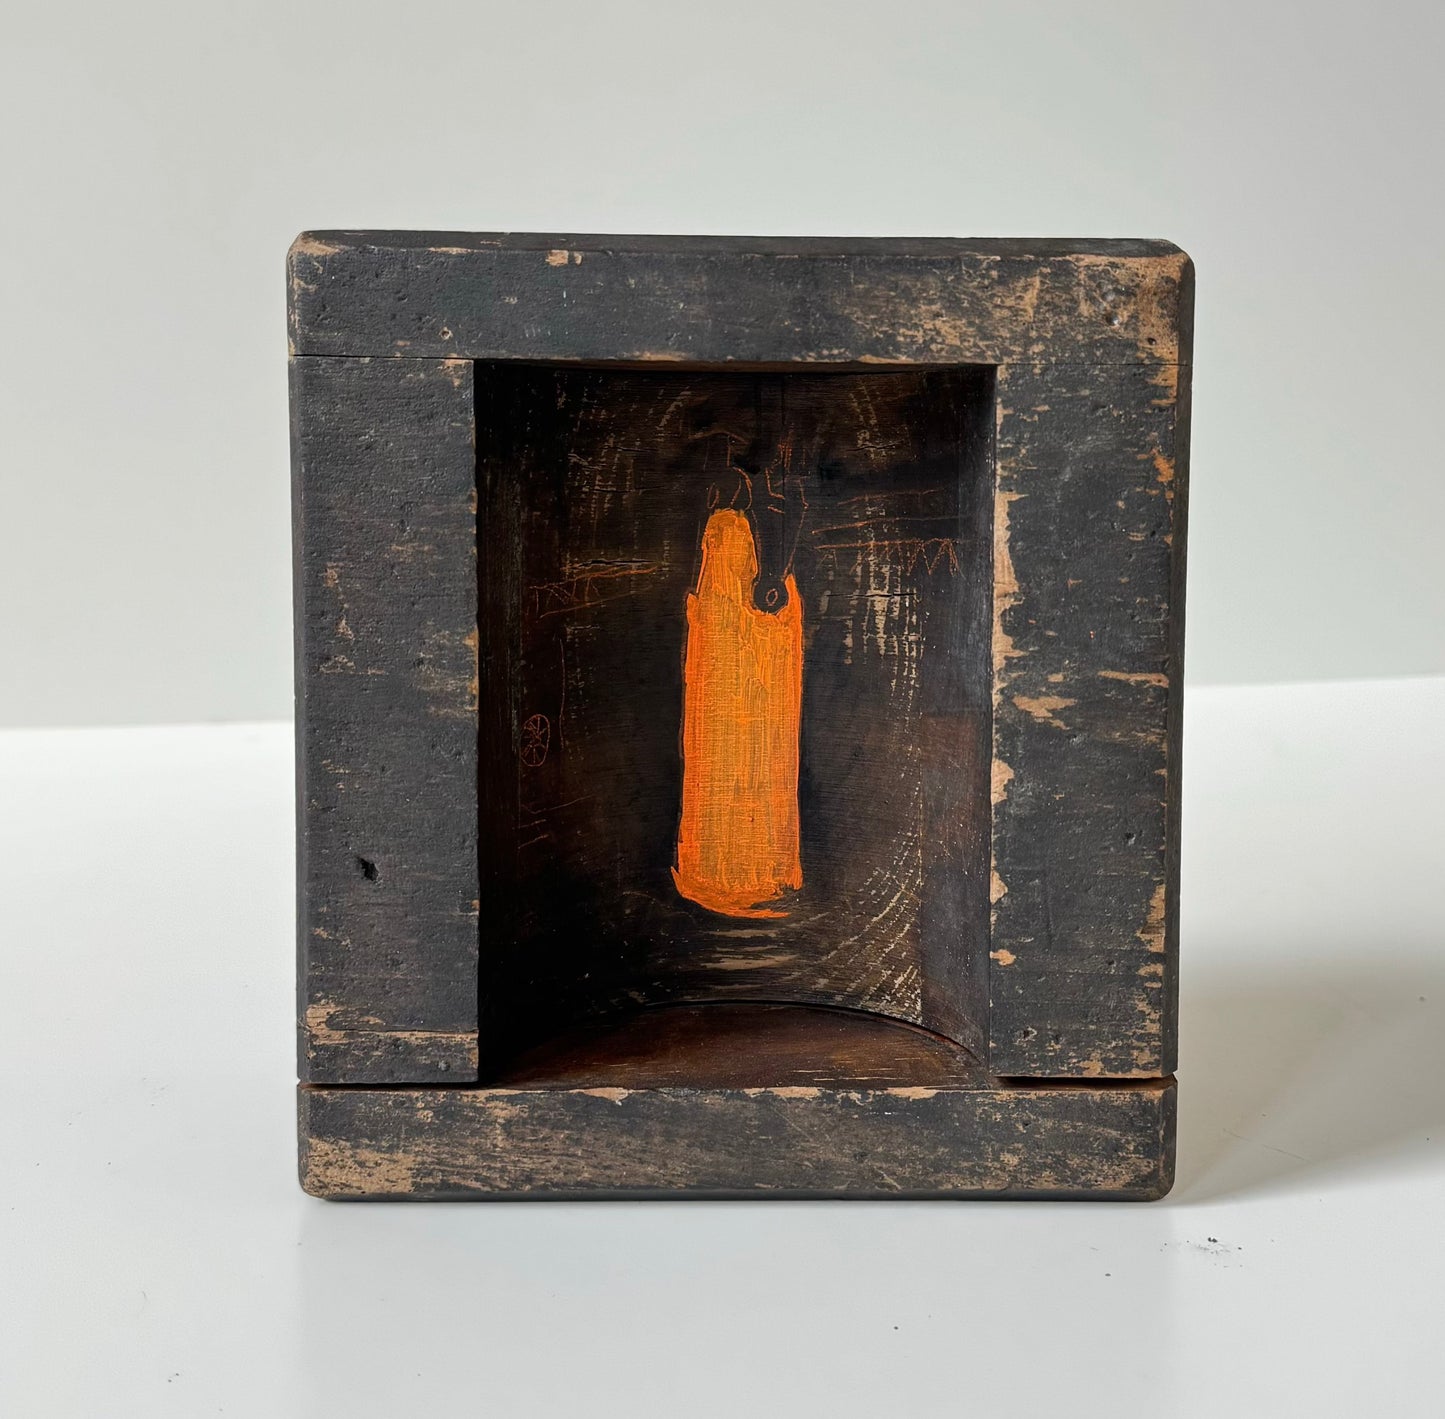 Hot Ingot     oil and pigment on salvaged wooden core box    8h x 7w x 3d inches